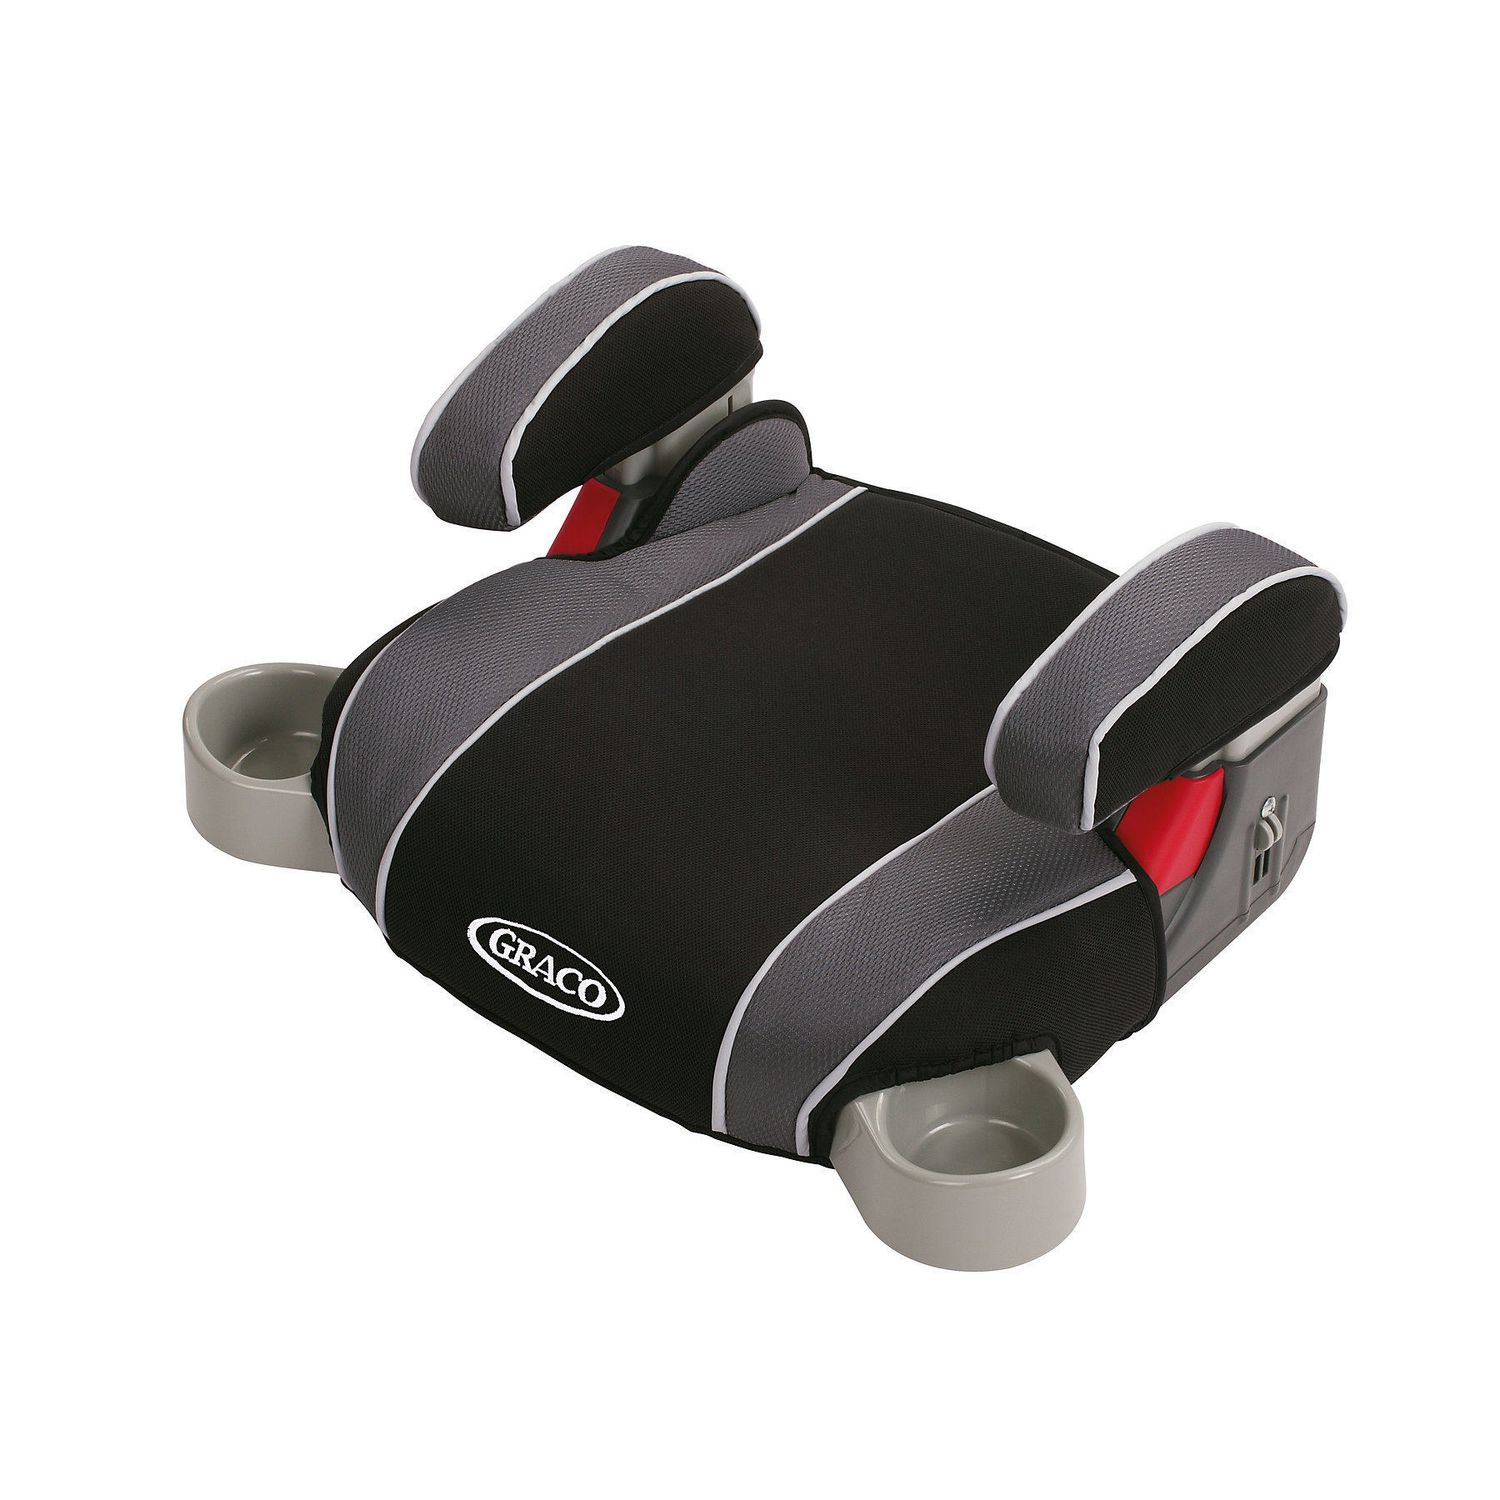 graco turbobooster backless booster car seat